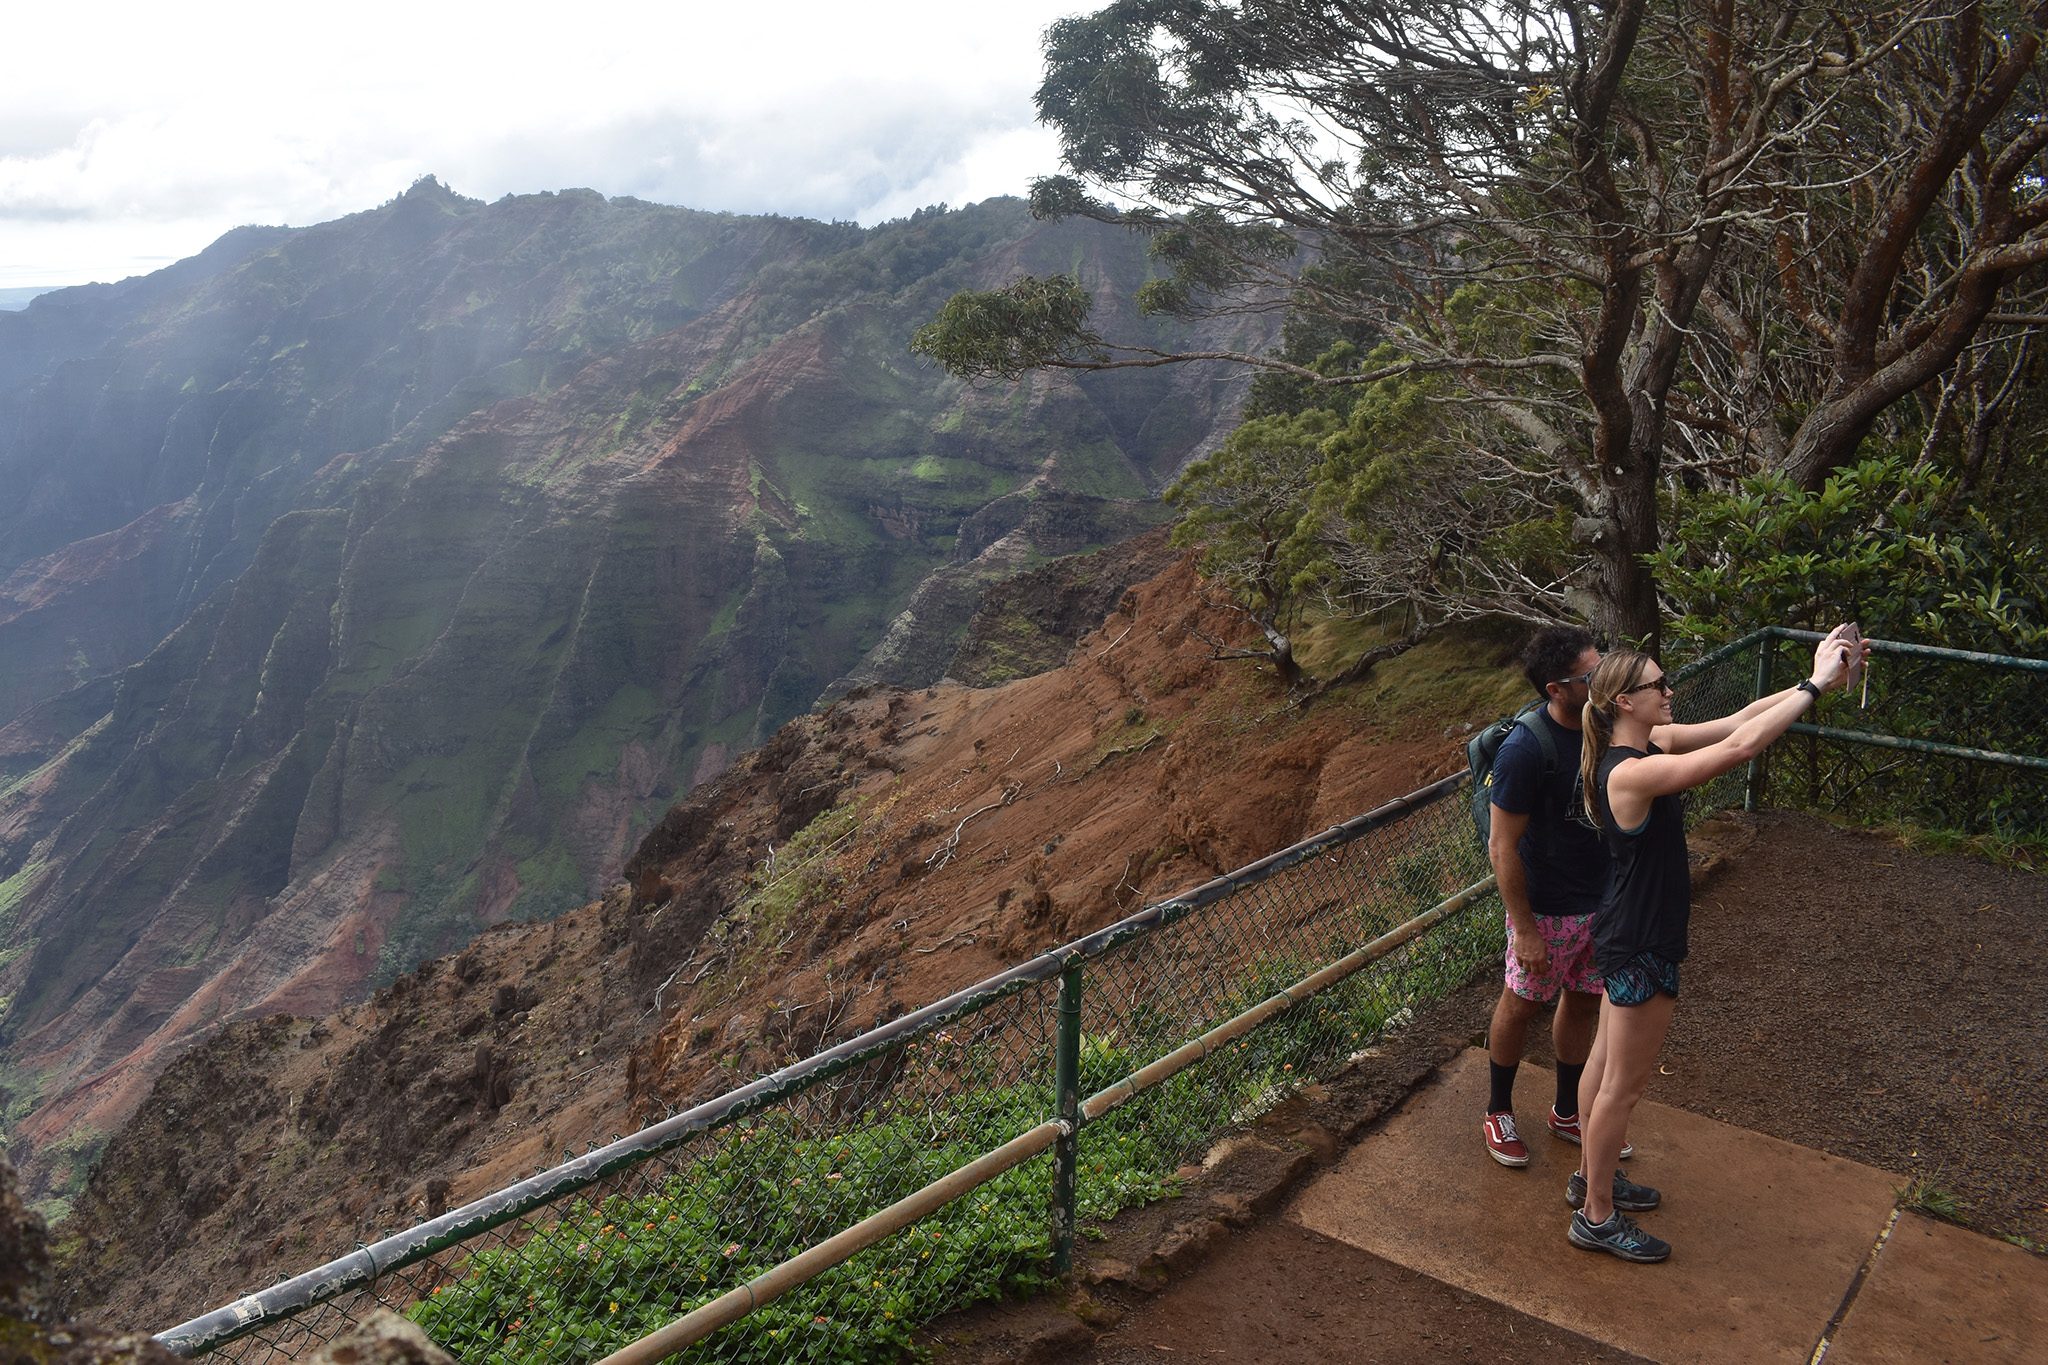 This deadly Kauai trail comes with plenty of warnings